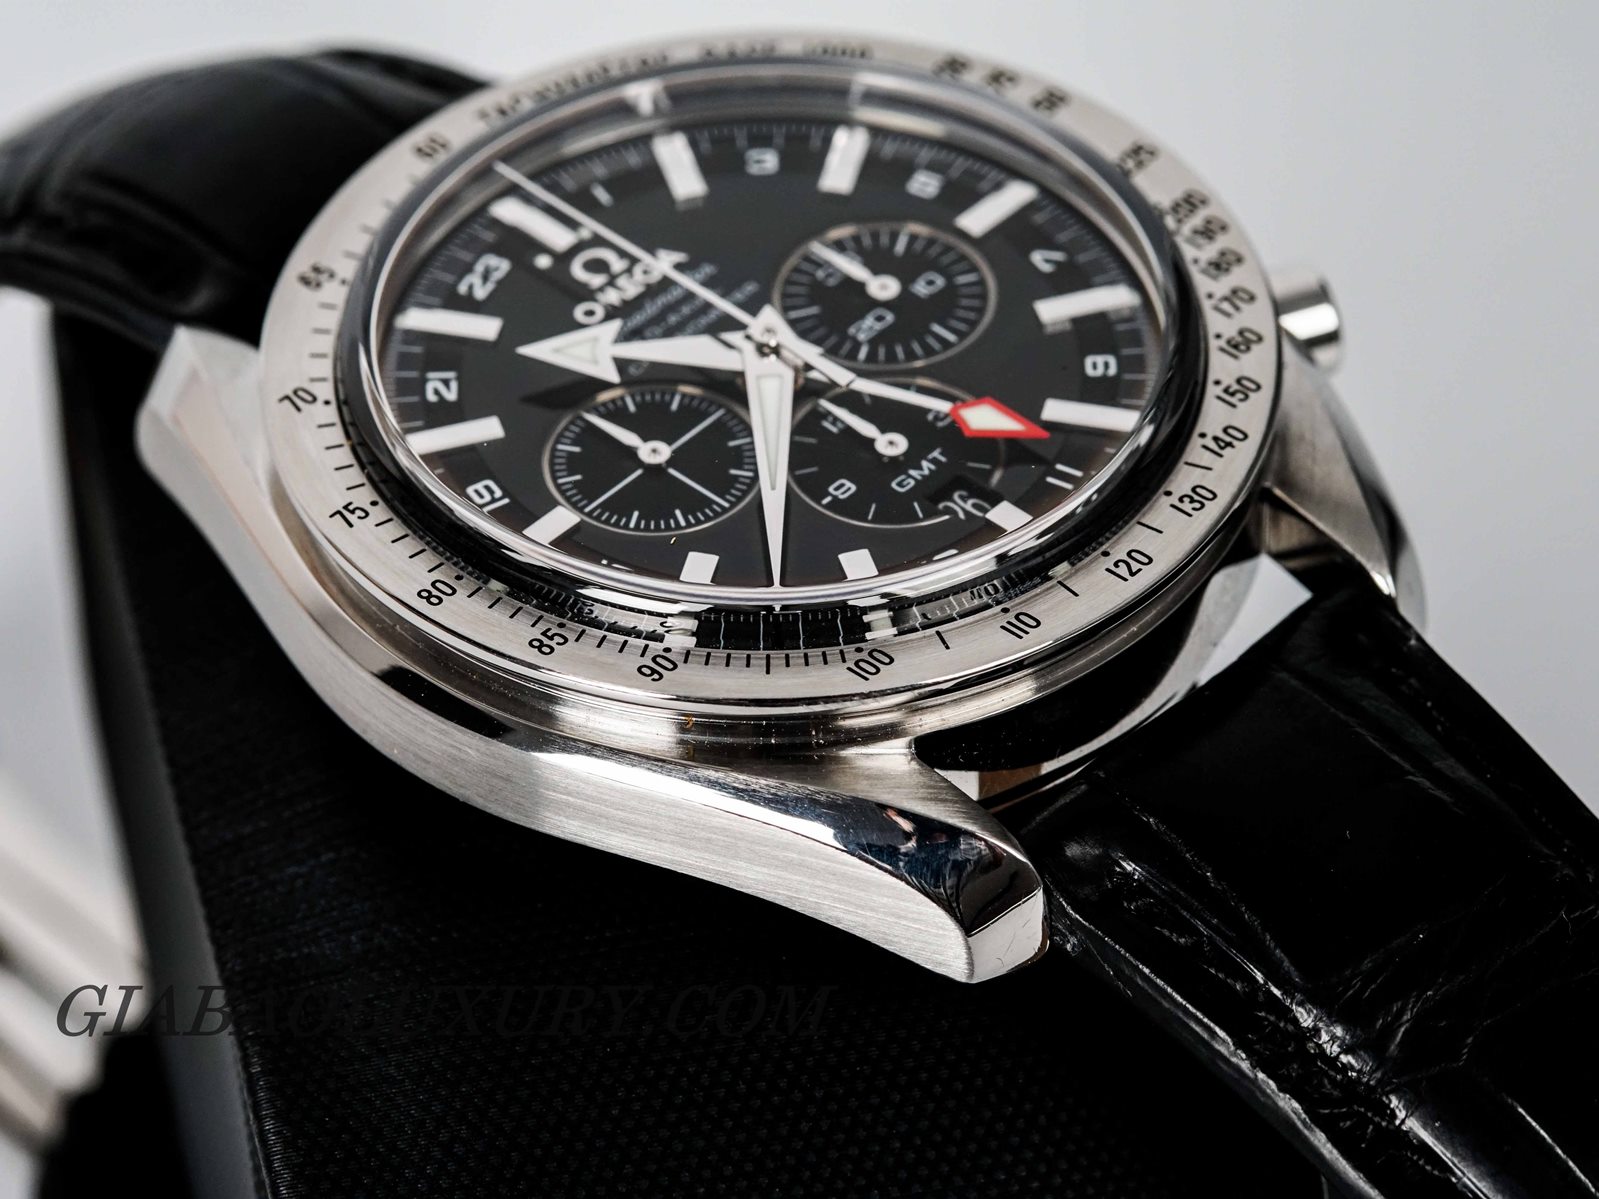 Đồng Hồ Omega Speedmaster Broad Arrow Co-Axial GMT Chronograph 44.25mm 3881.50.37